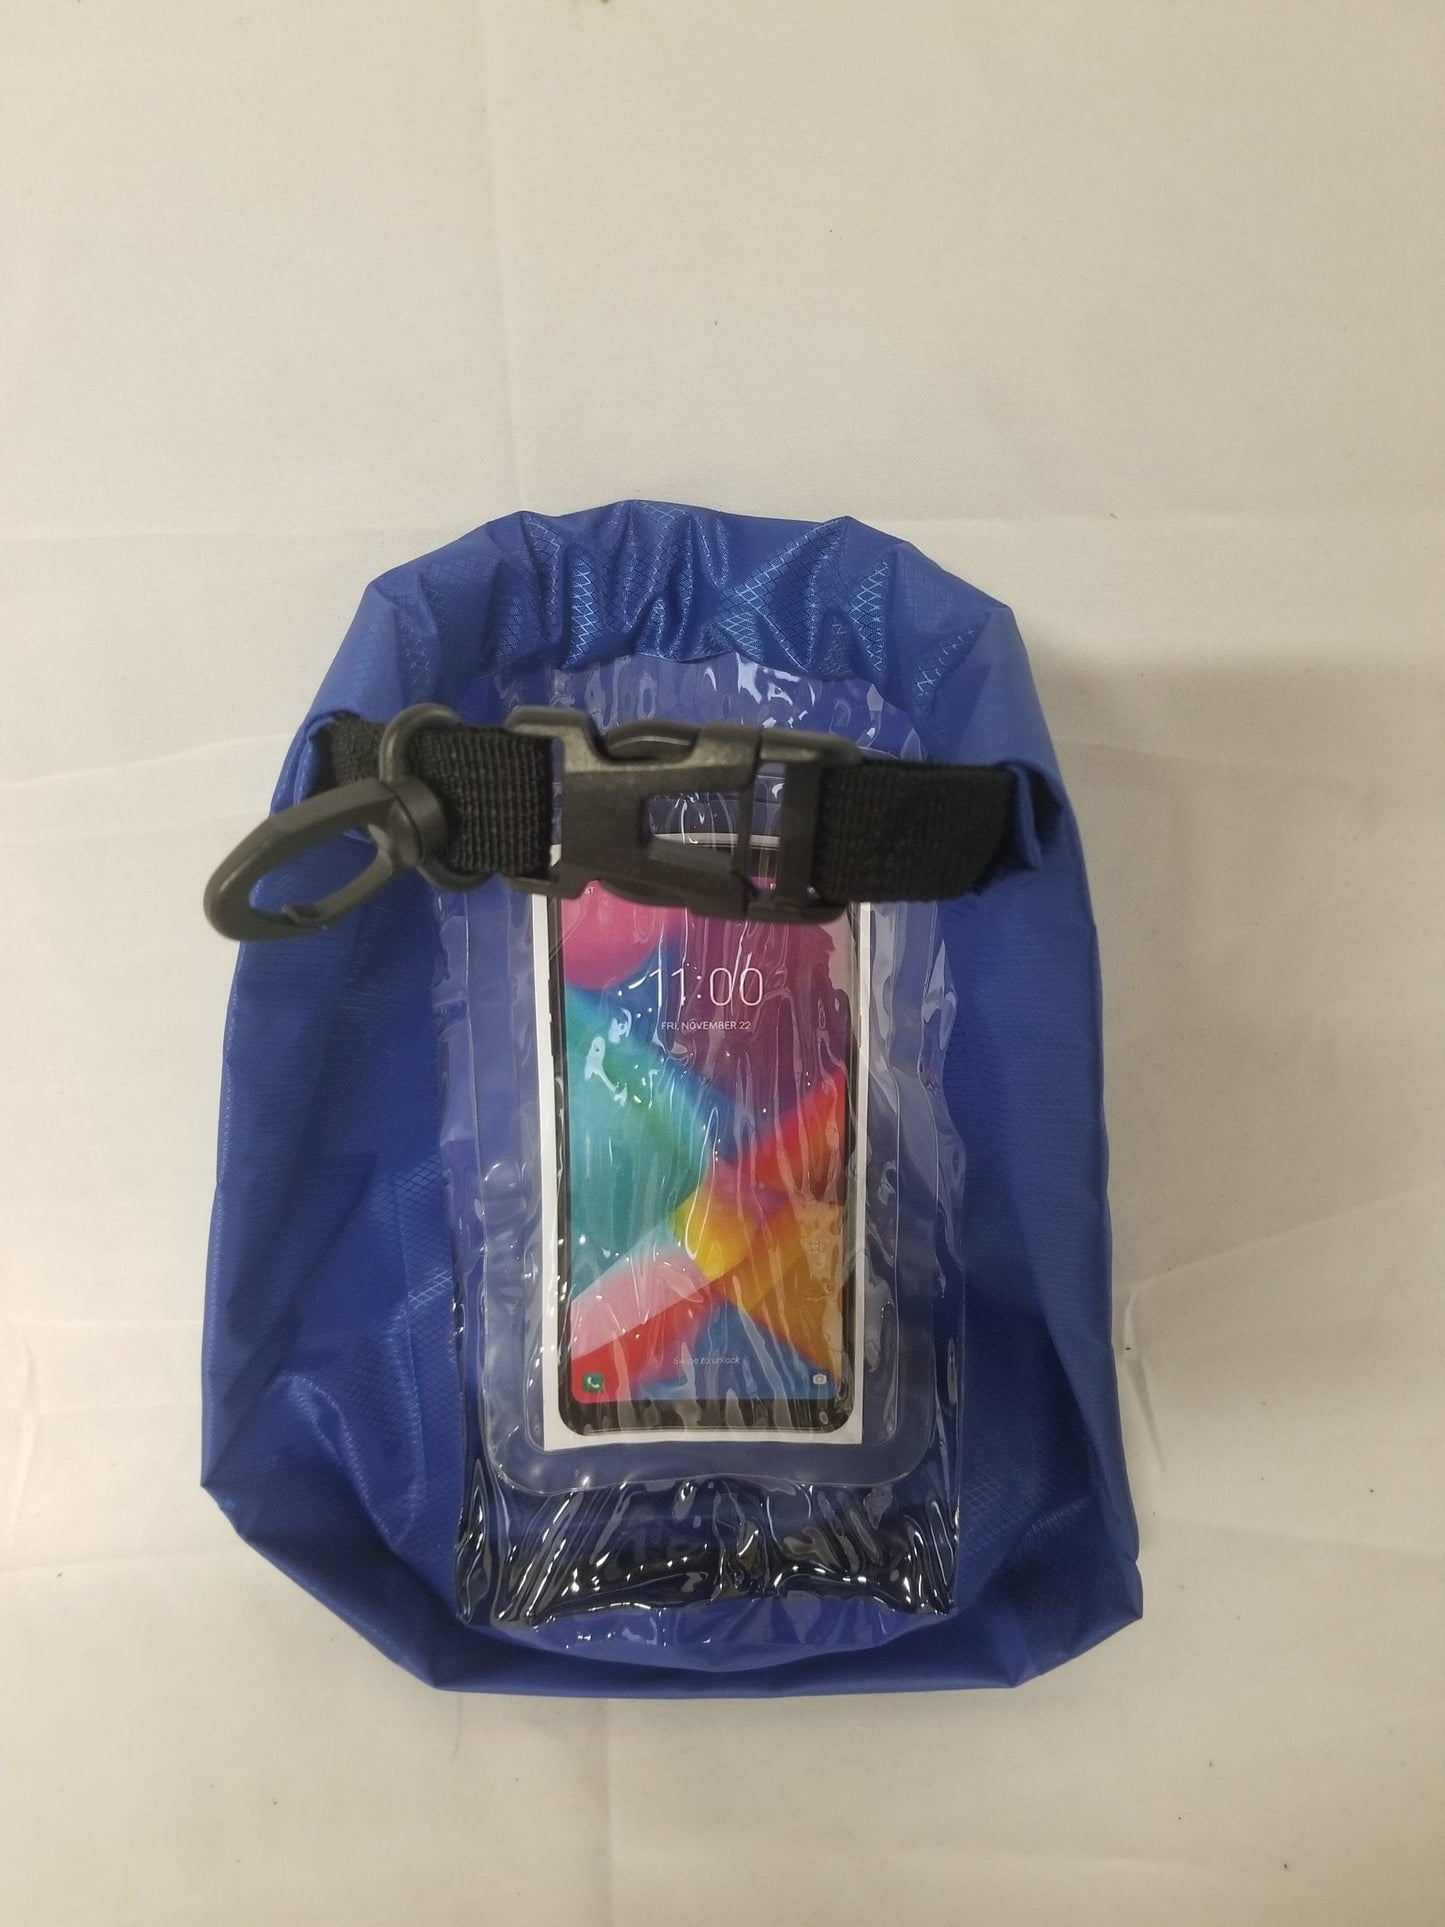 Perfect Dry Bag for Cell Phone and More!